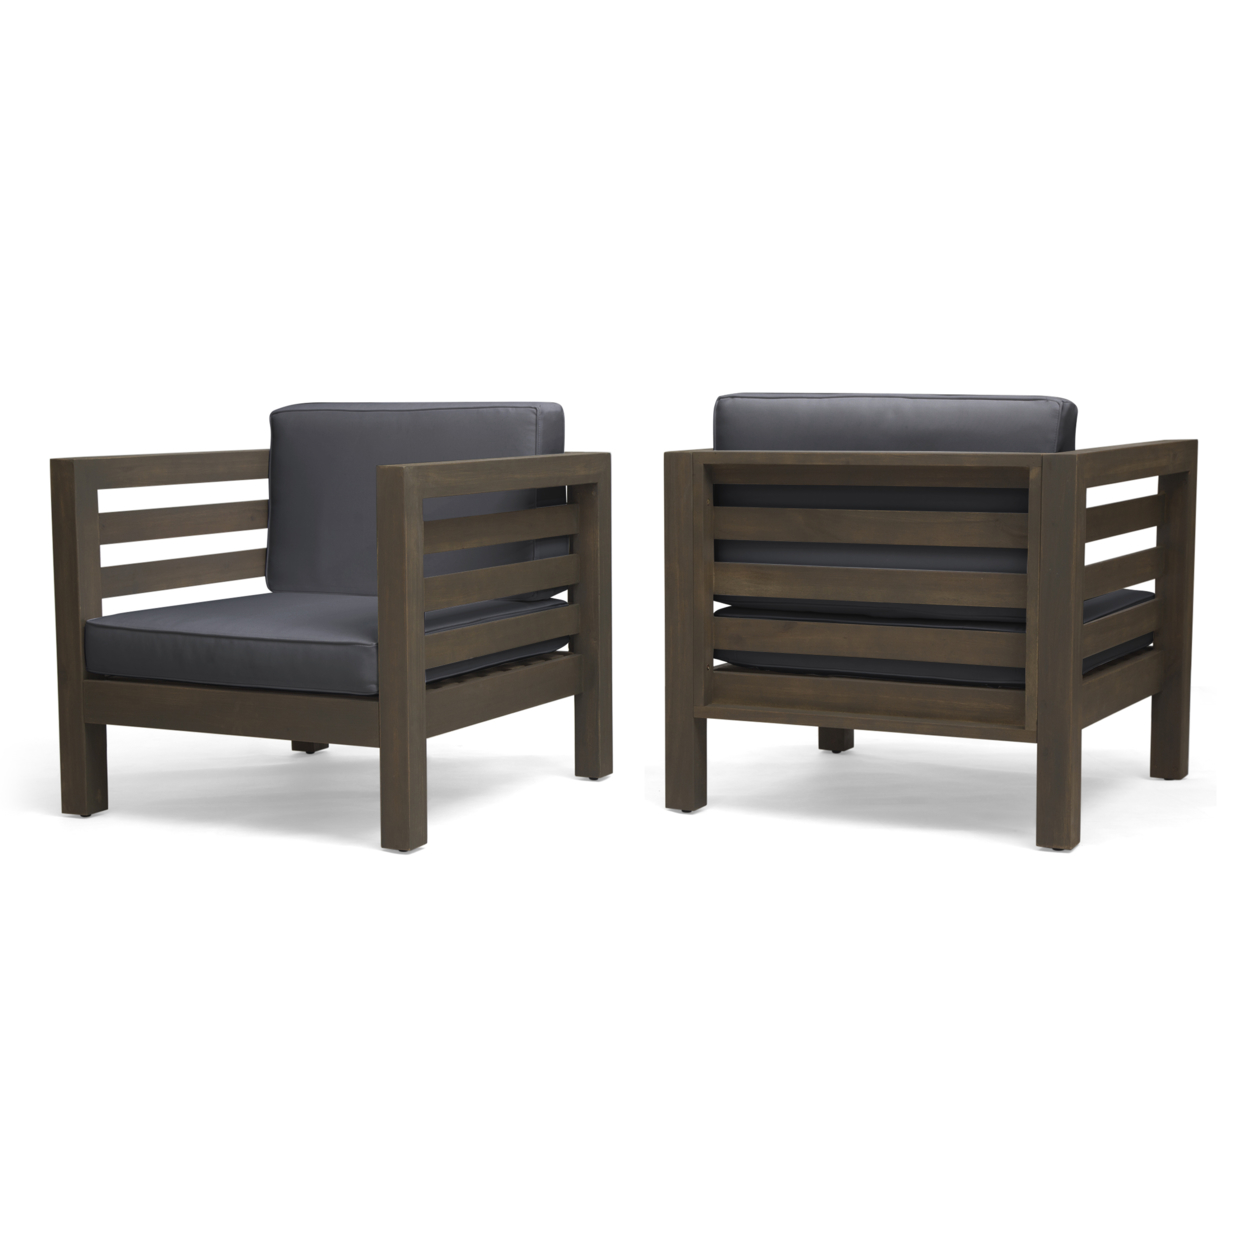 Louise Outdoor Acacia Wood Club Chairs With Cushions (Set Of 2) - Teak Finish + Blue